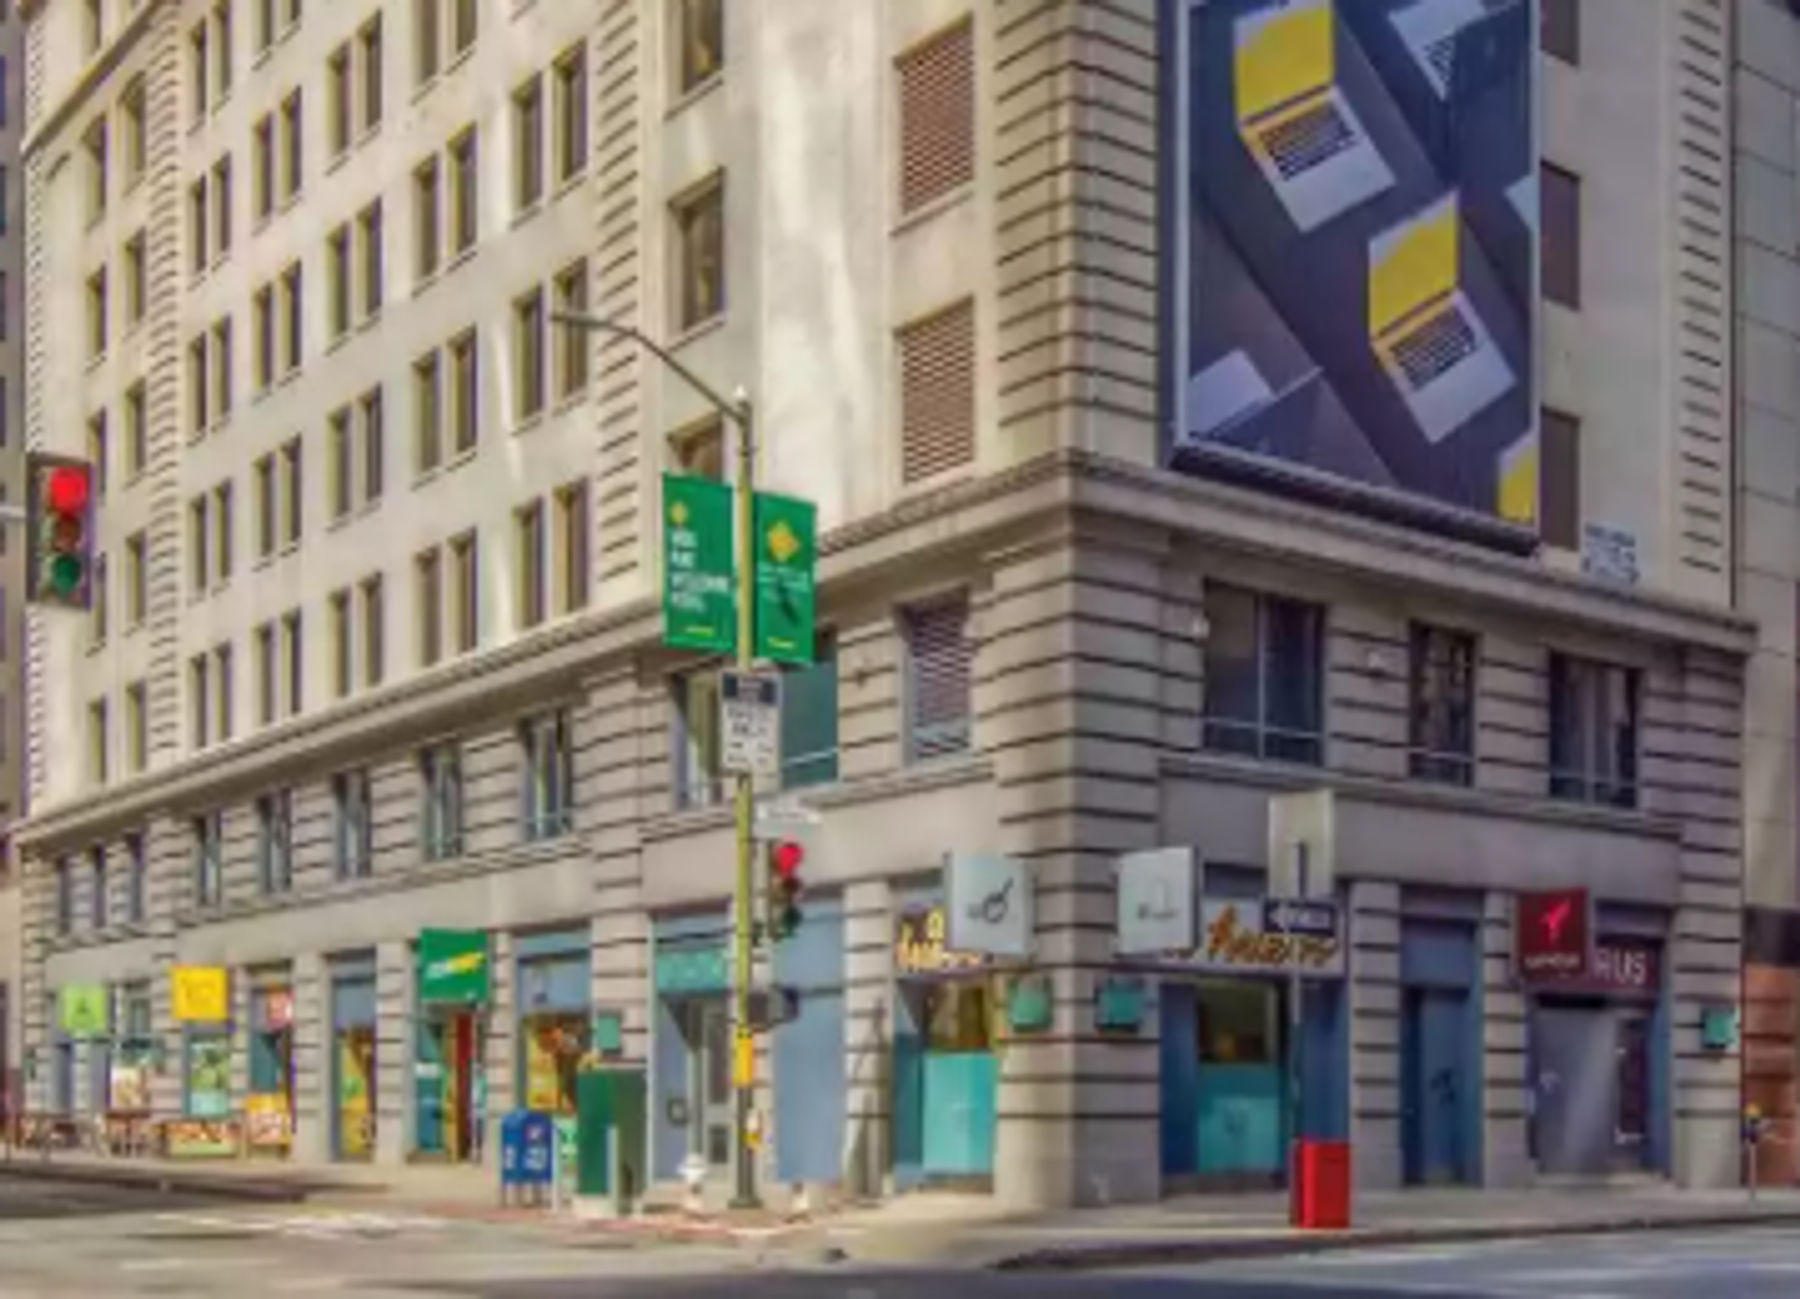 Pine St Ground Floor Retail - 3 Units Available | Downtown San Francisco